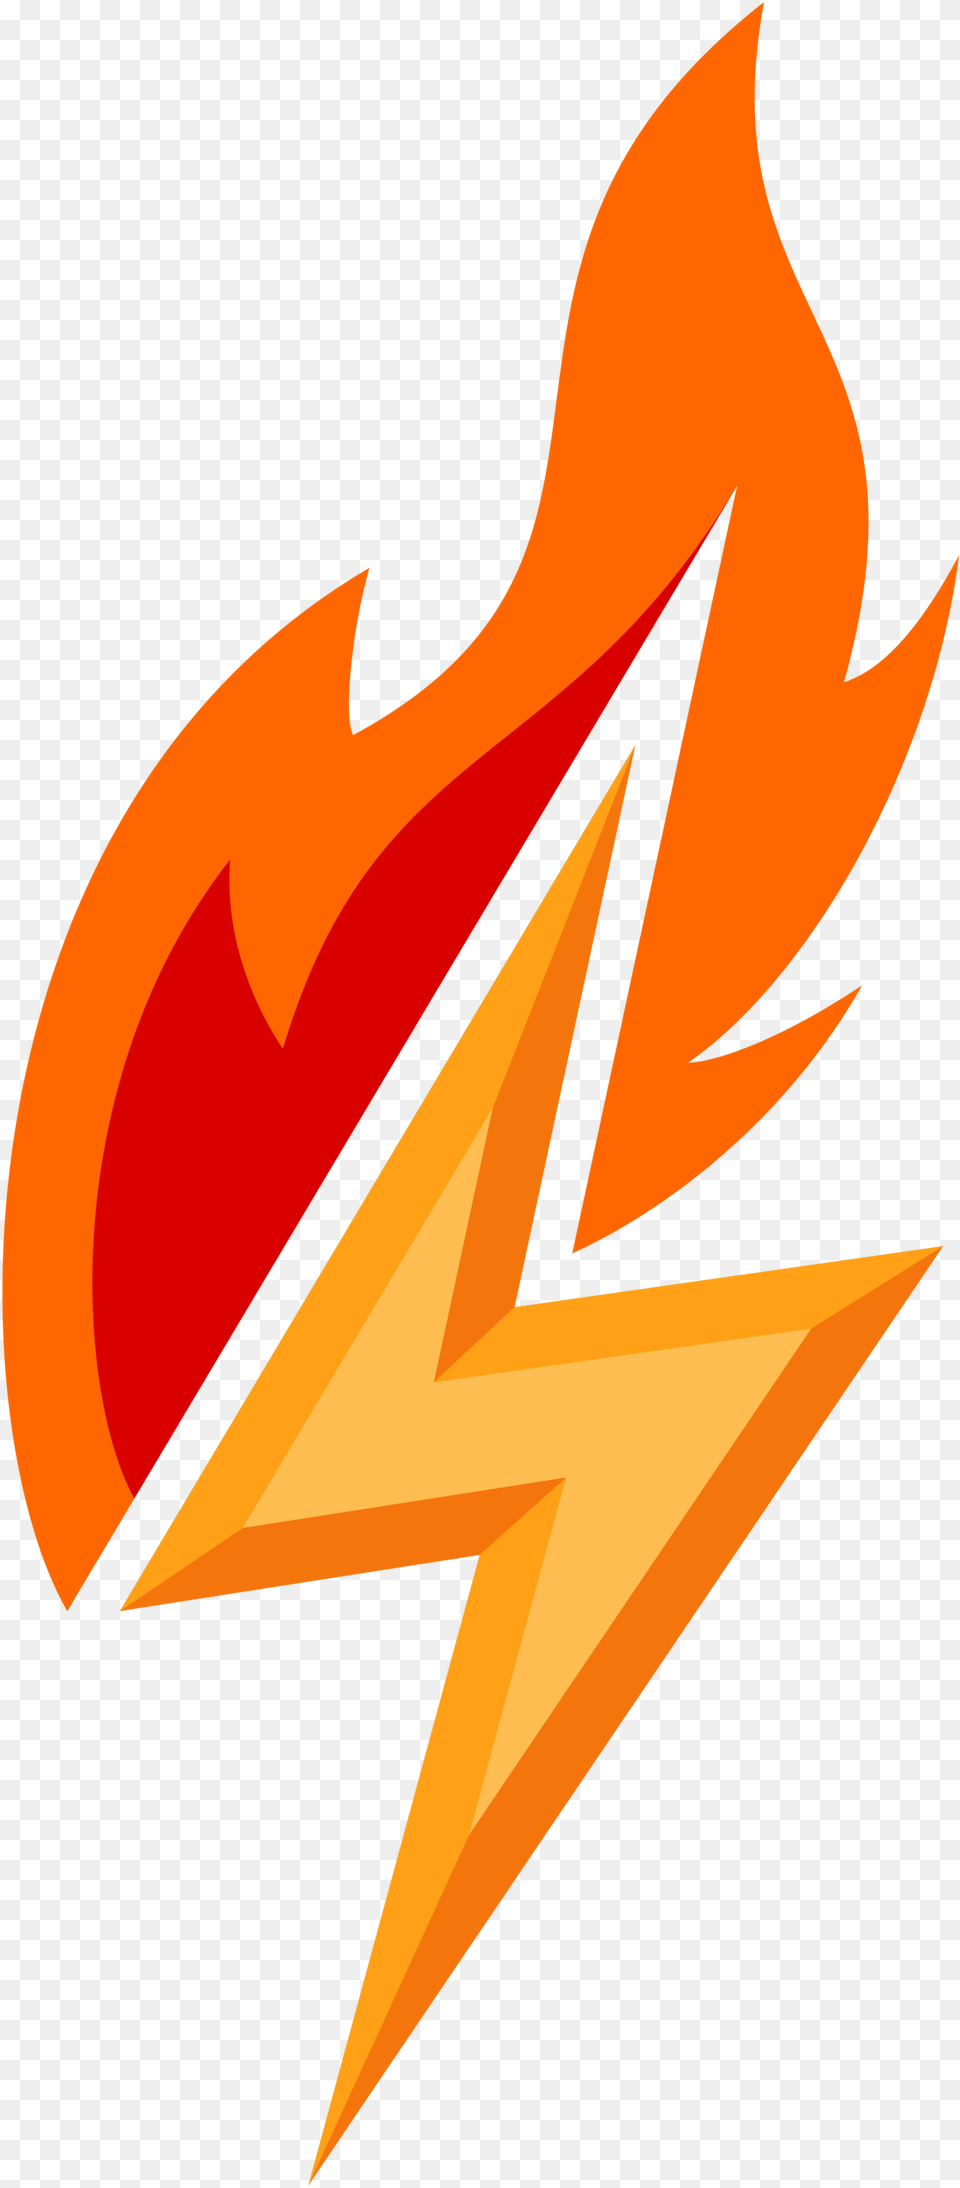 Flame Bolt Flame Bolt Lightning Bolt With Flames, Fire, Animal, Fish, Sea Life Free Transparent Png